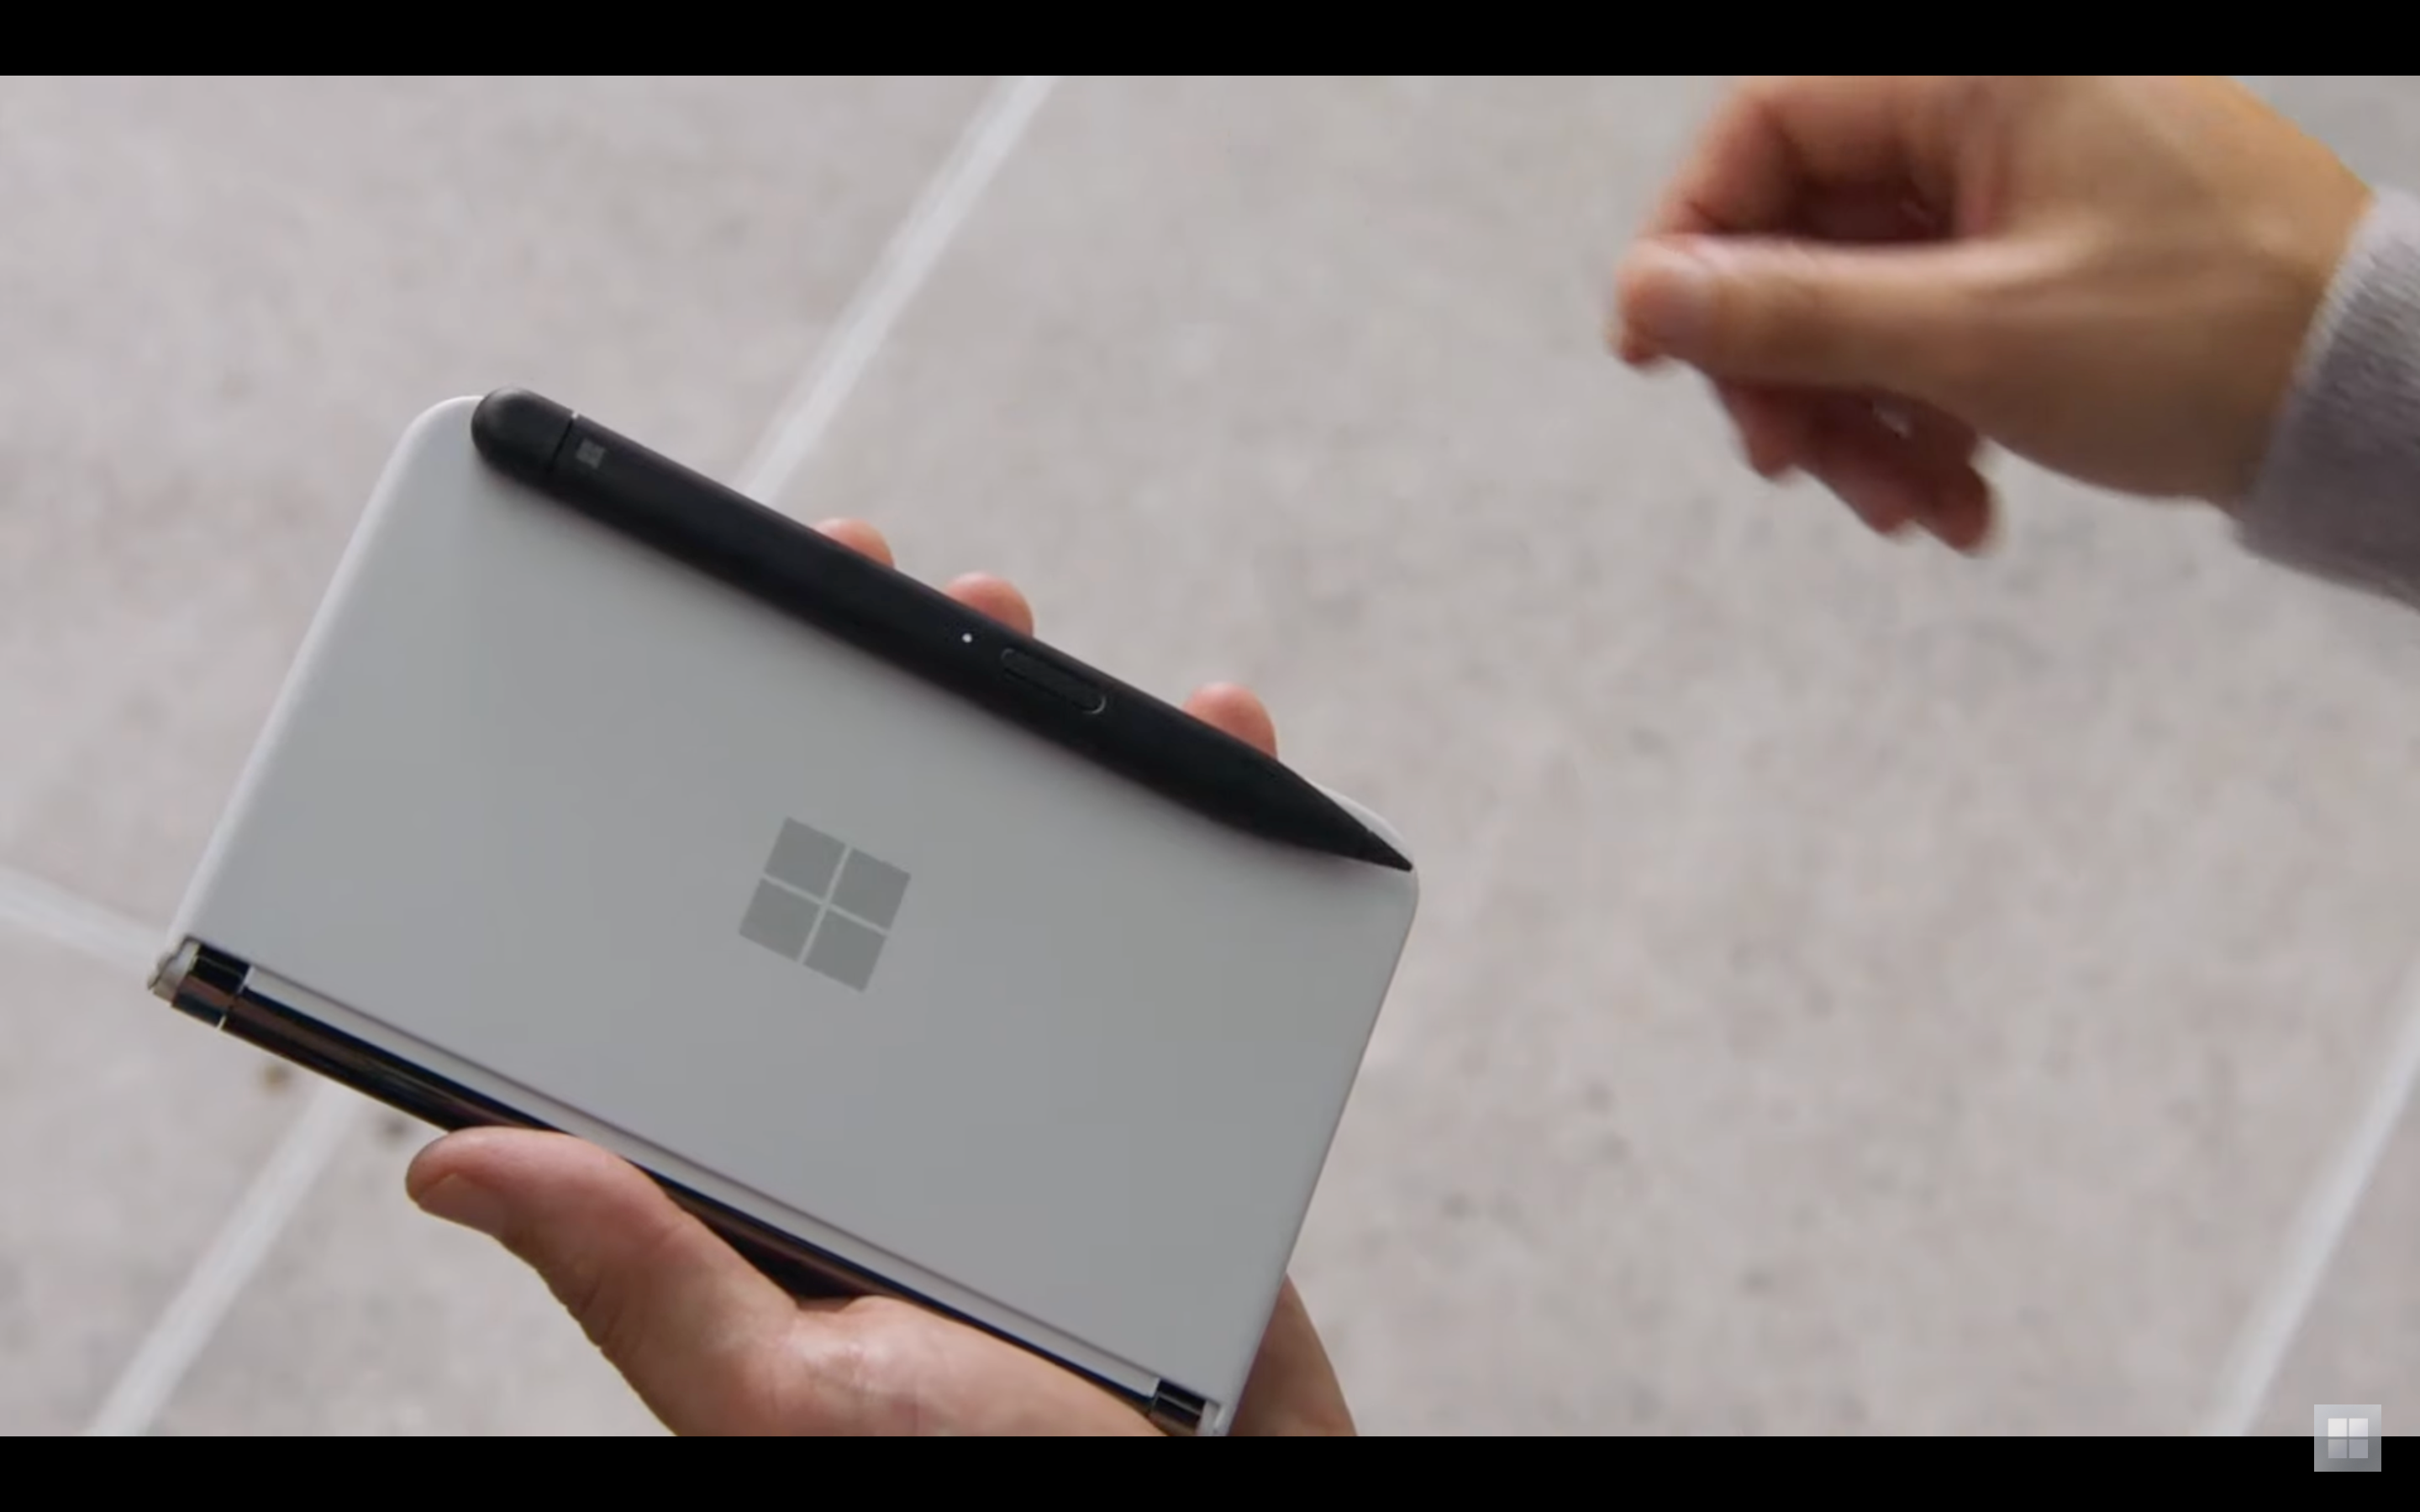 Microsoft's Surface Duo 2 is here with three cameras, updated displays, $1500 price